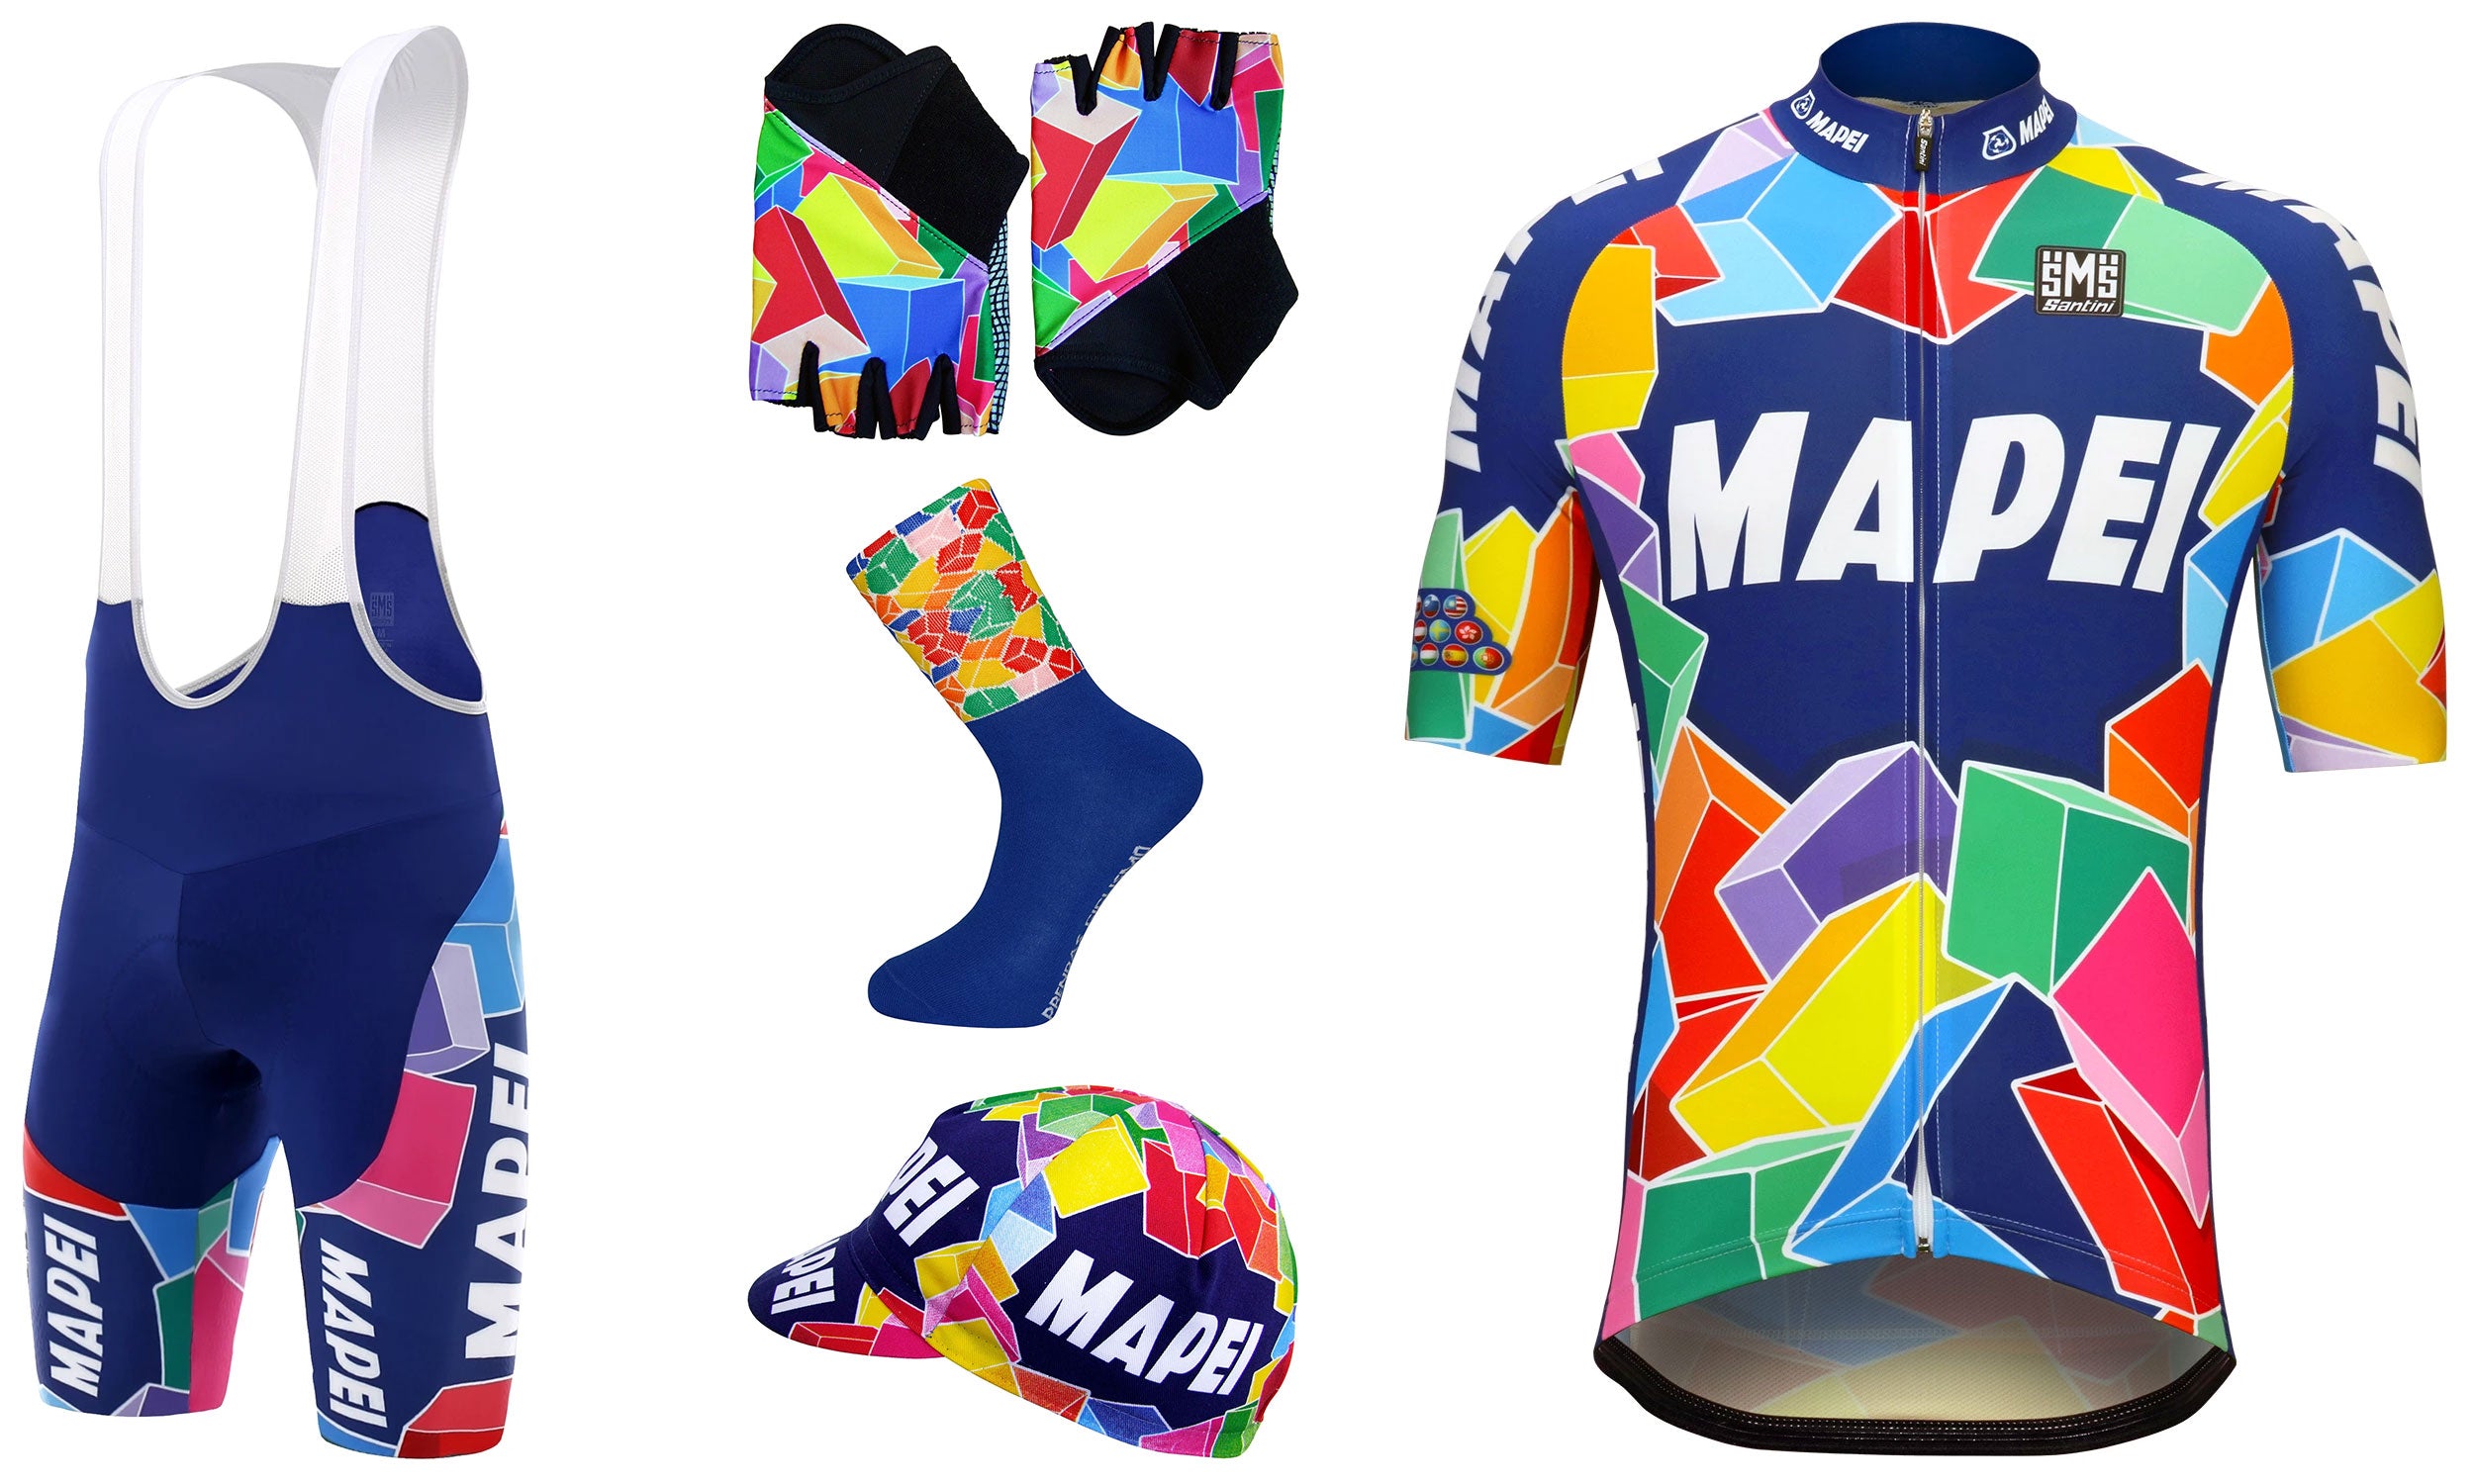 You can buy MAPEI Cycling Jerseys and other MAPEI Team Cycling Kit by Santini at Prendas Ciclismo.